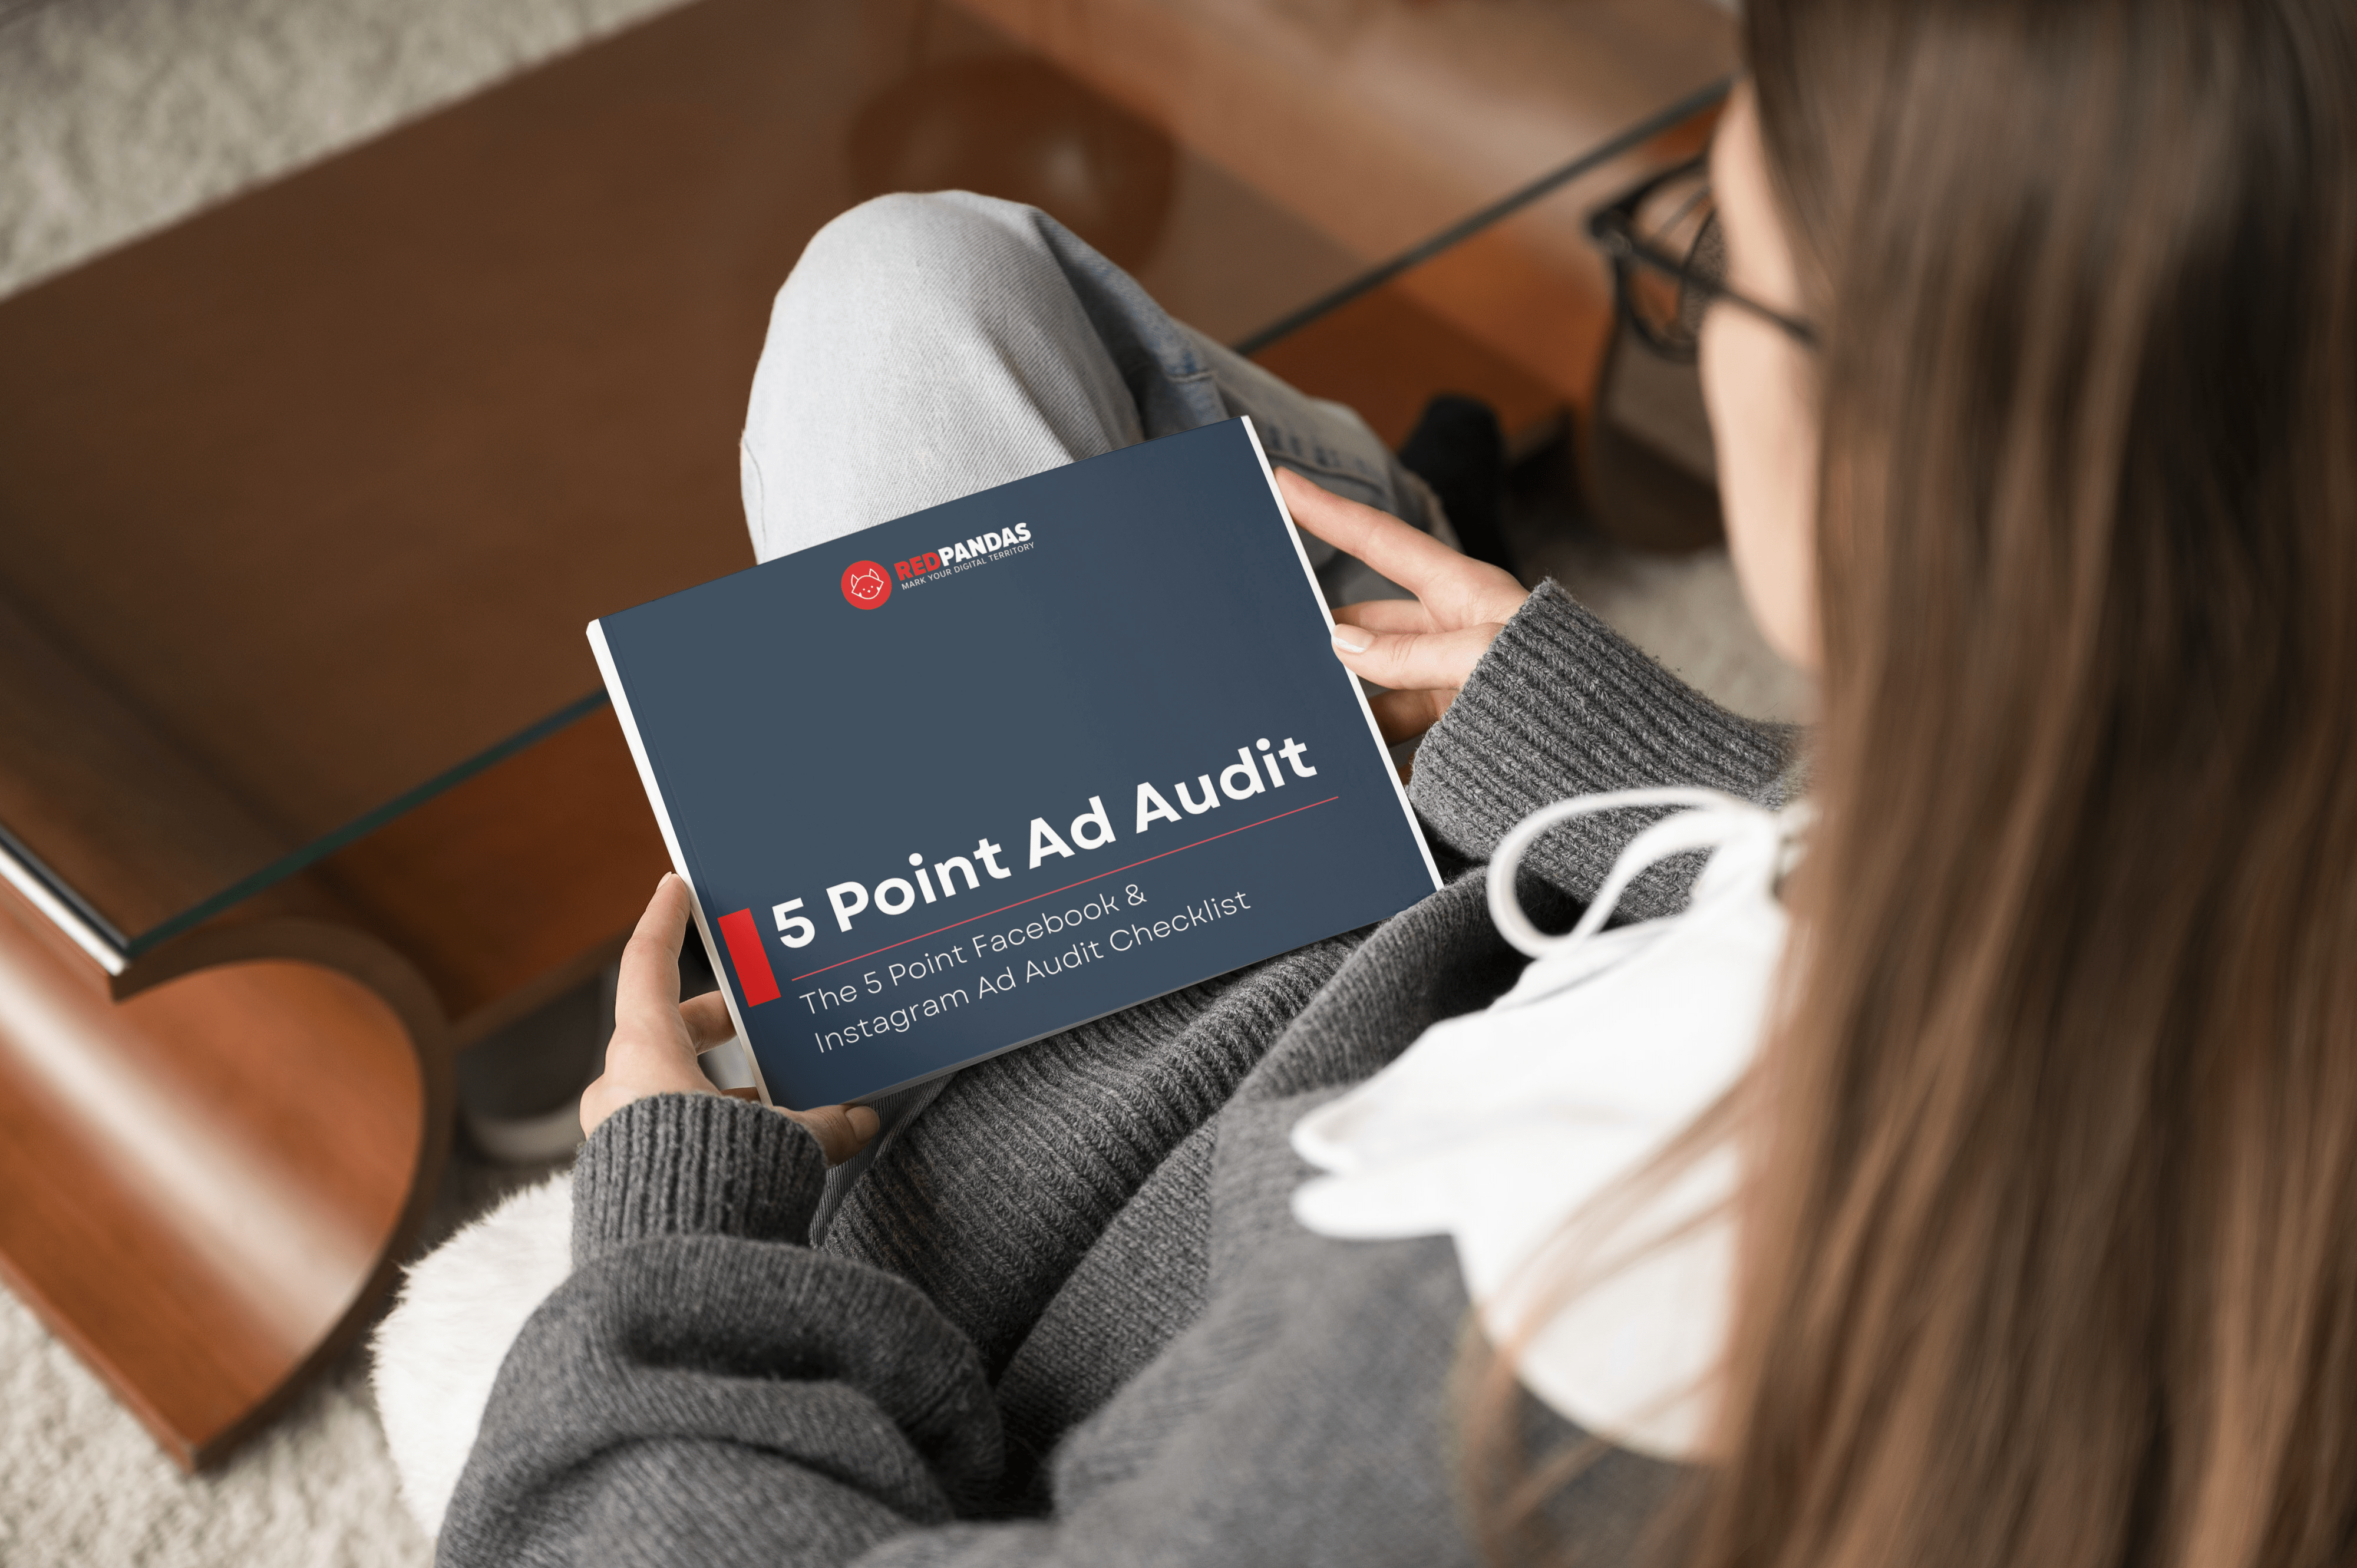 5 point ad audit guide